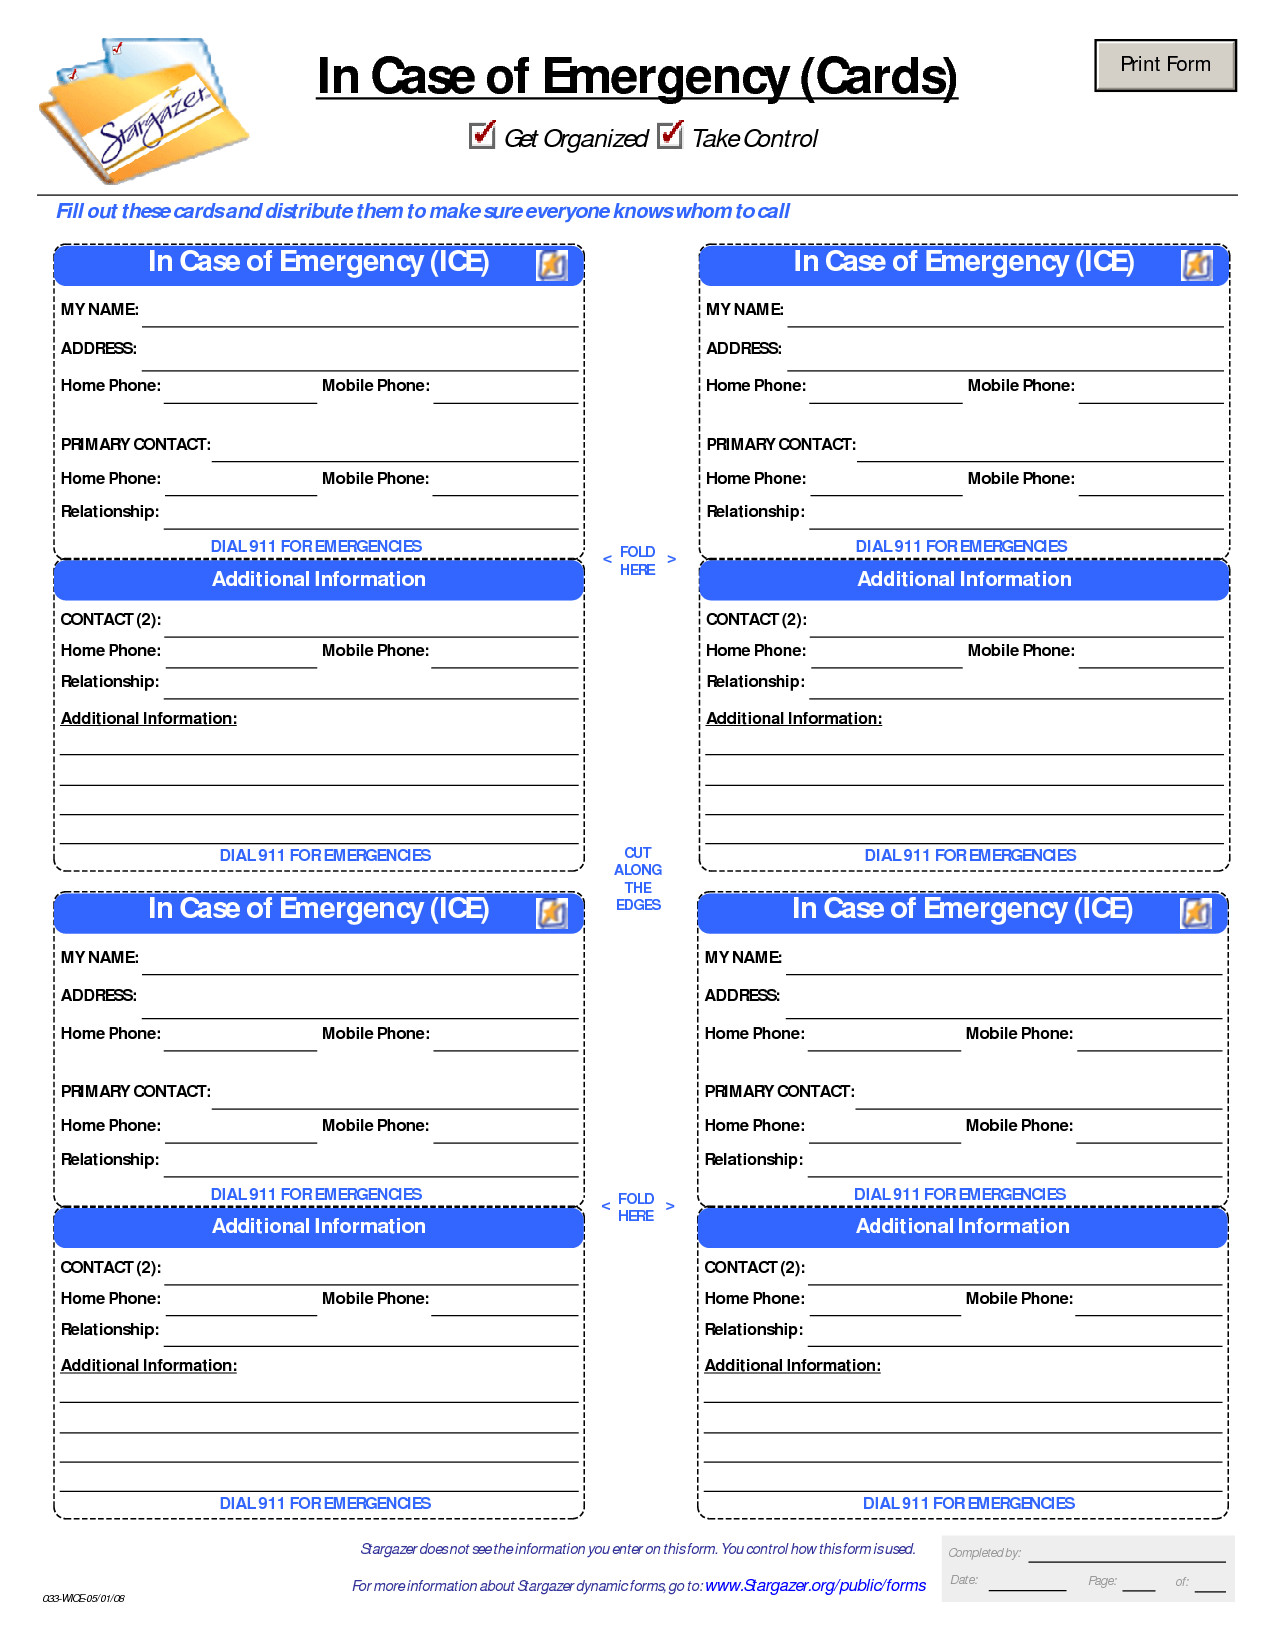 Printable Emergency Card Template Id Card Template In Case Of Emergency Cards